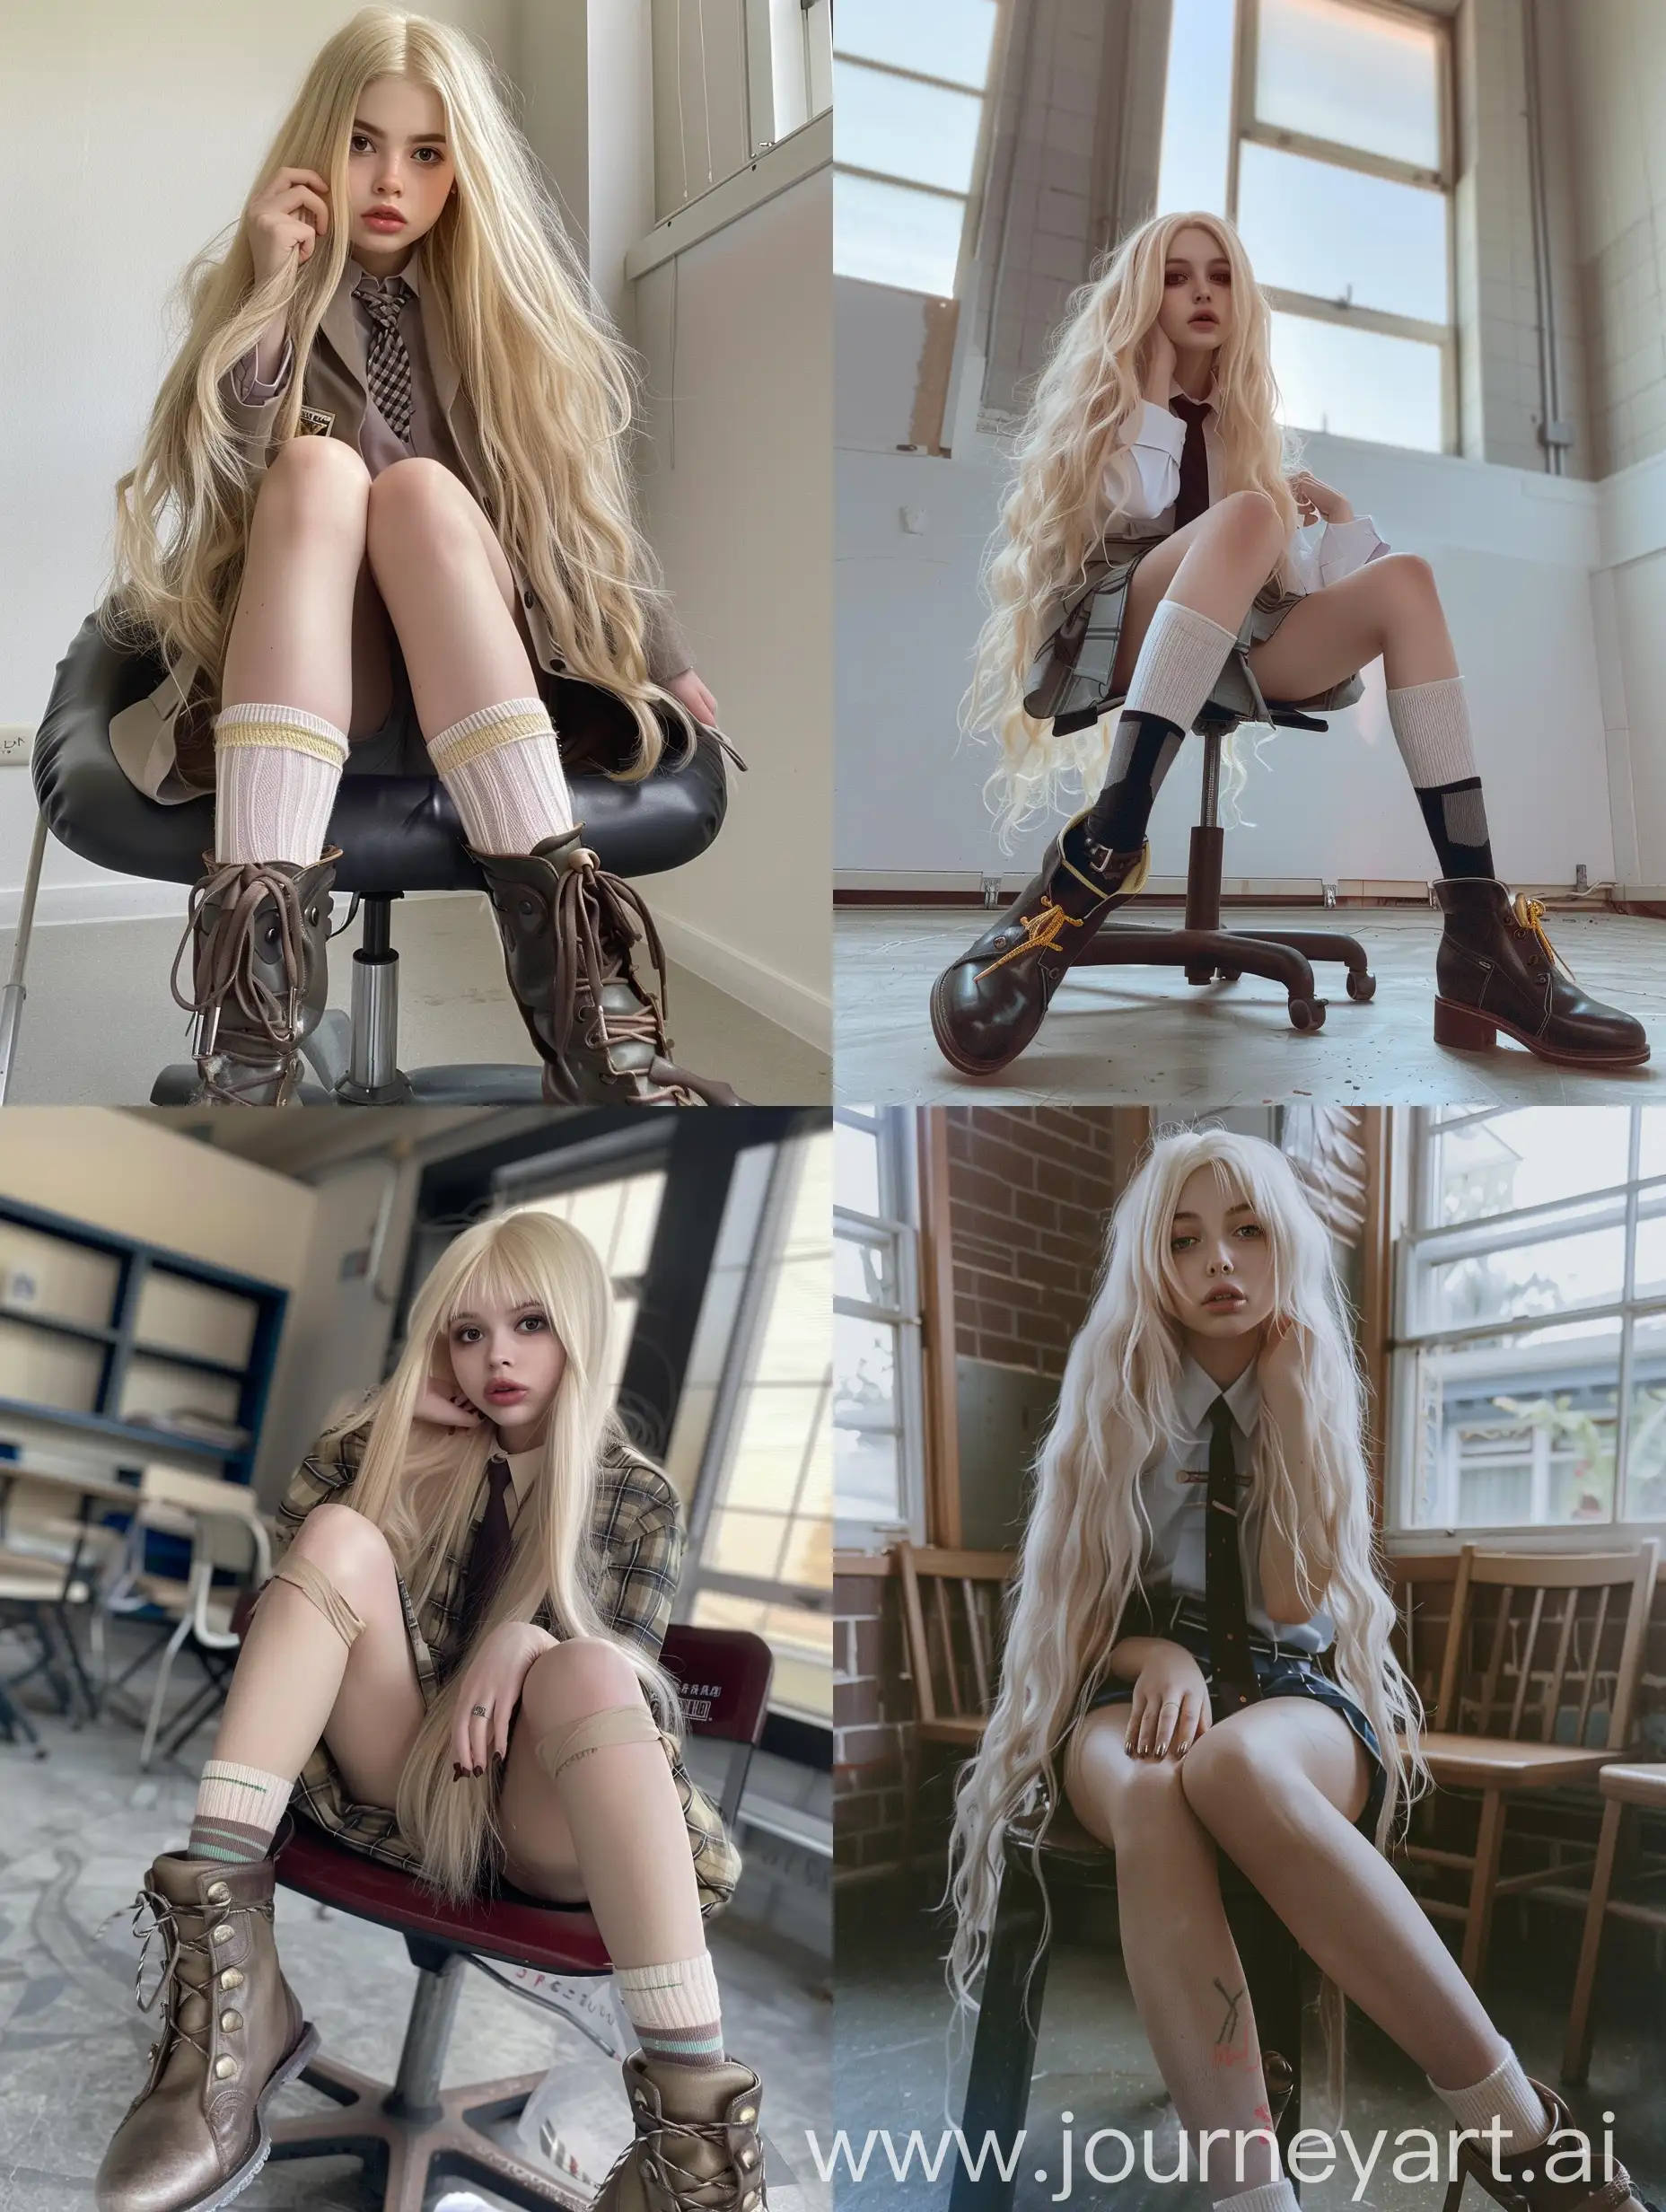 1 girl, long blond hair ,18  years  old ,influencer ,  beauty,  in  the  school  ,  school  uniform  ,  makeup   ,   sitting  on  chair ,     socks  and  boots   , no  effect ,   selfie  ,  iphone  selfie  ,    no  filters   , iphone  photo  ,  natural, fat legs , down view